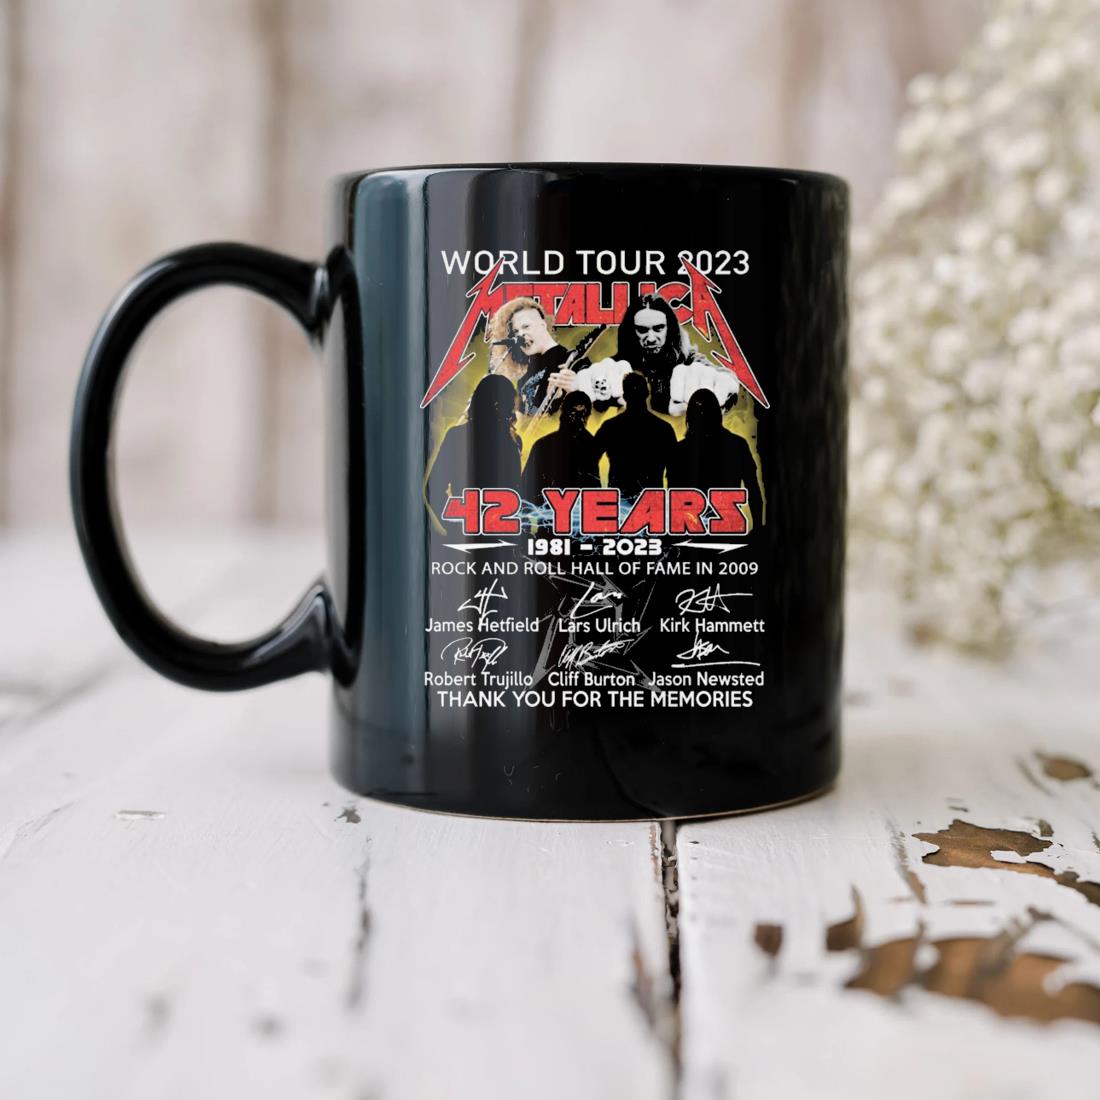 World Tour 2023 Metallica 42 Years 1981-2023 Rock And Roll Hall Of Fame In 2009 Thank You For The Memories Signatures Mug